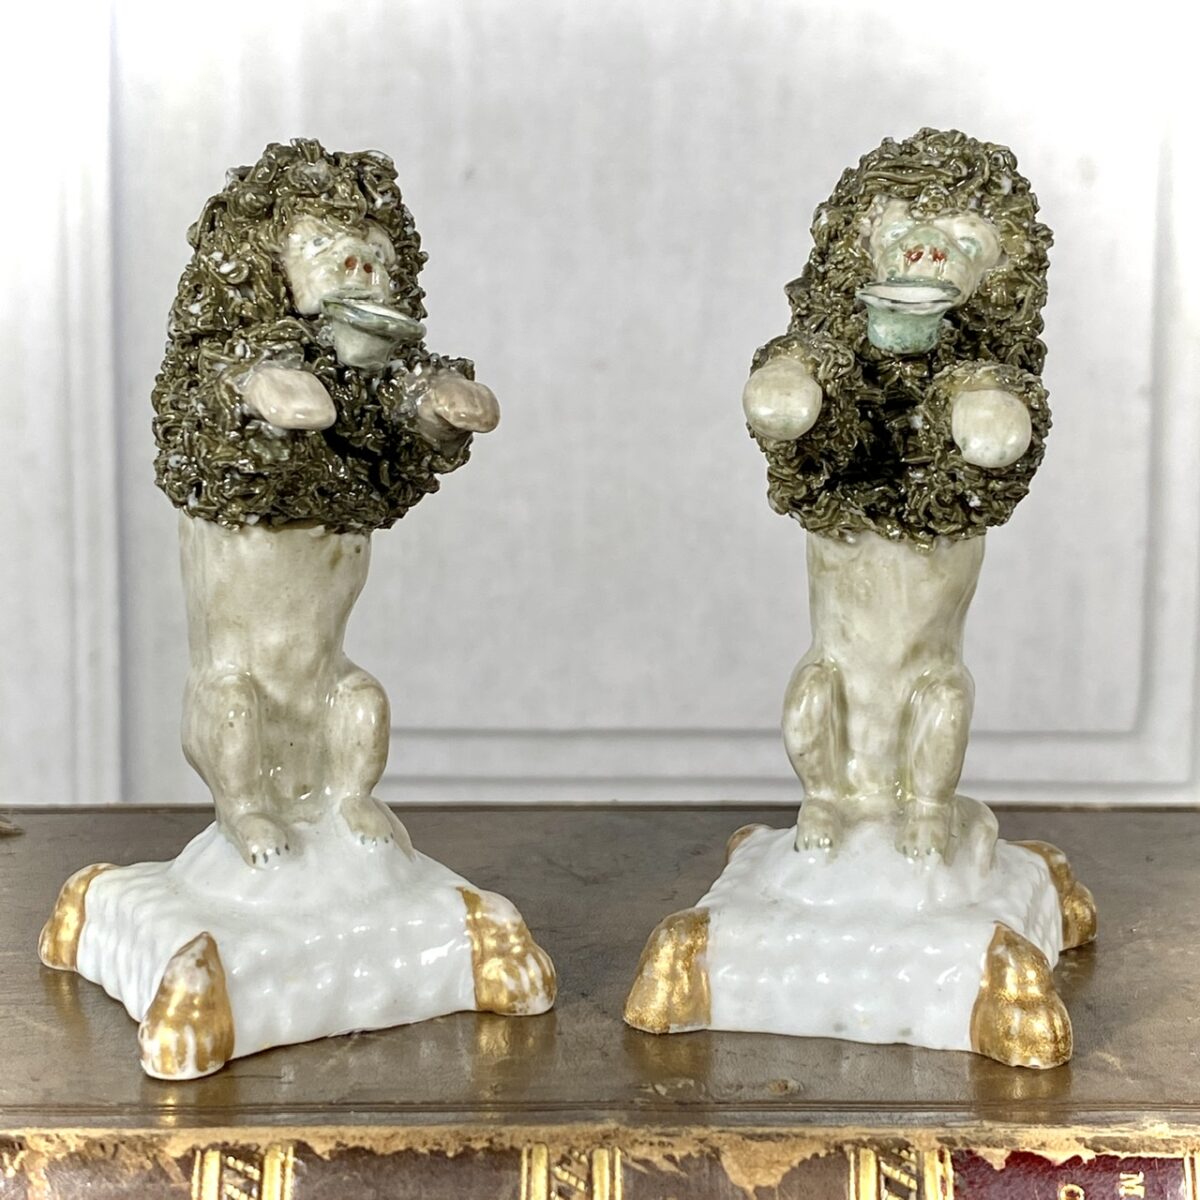 Pair of Staffordshire Minature Begging Poodles.